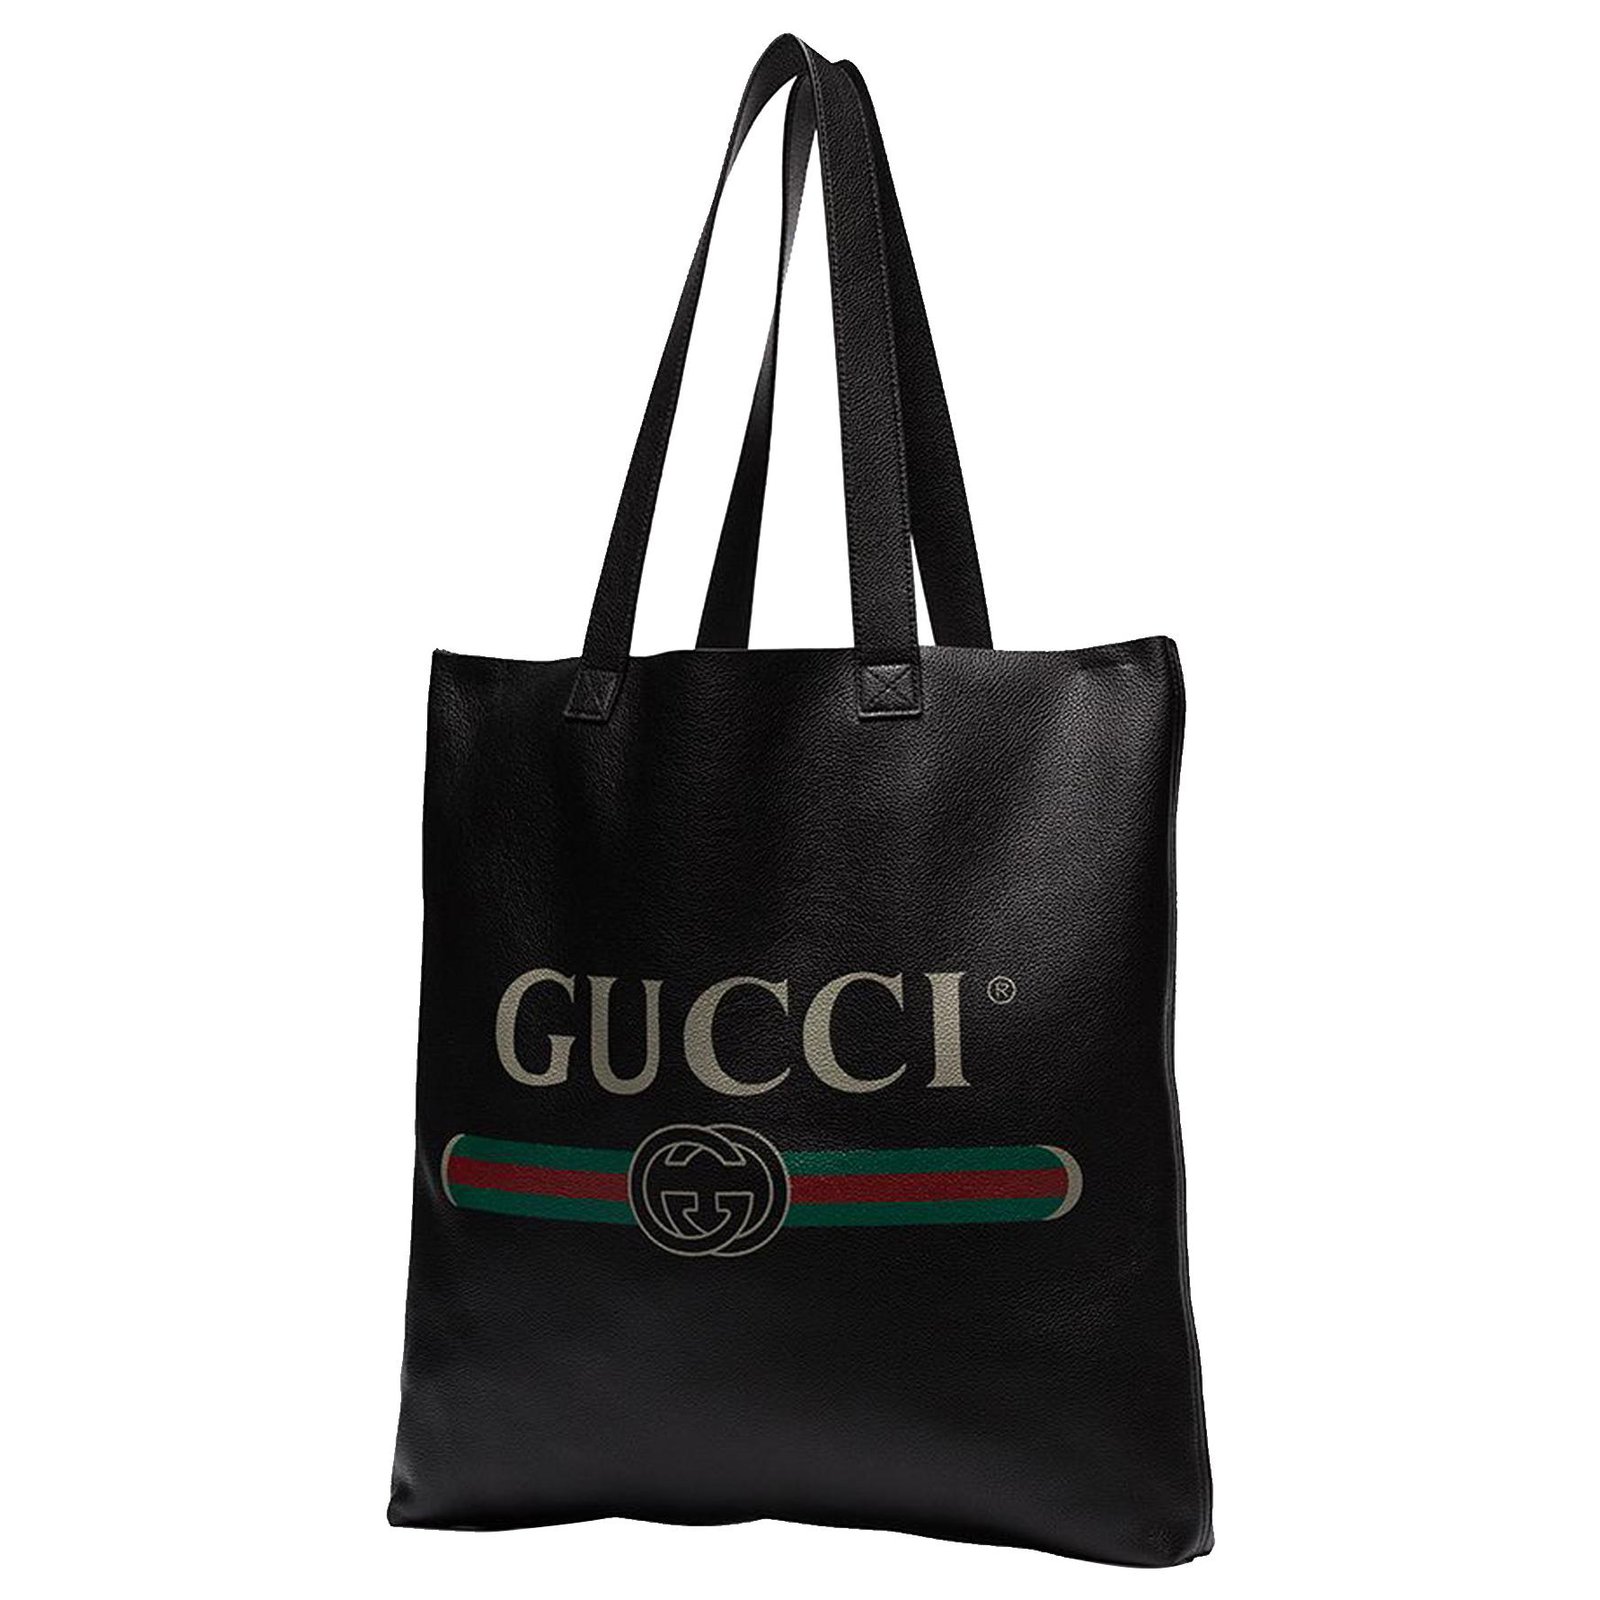 Gucci Black Logo Leather Tote Bag Multiple colors Pony-style calfskin ...